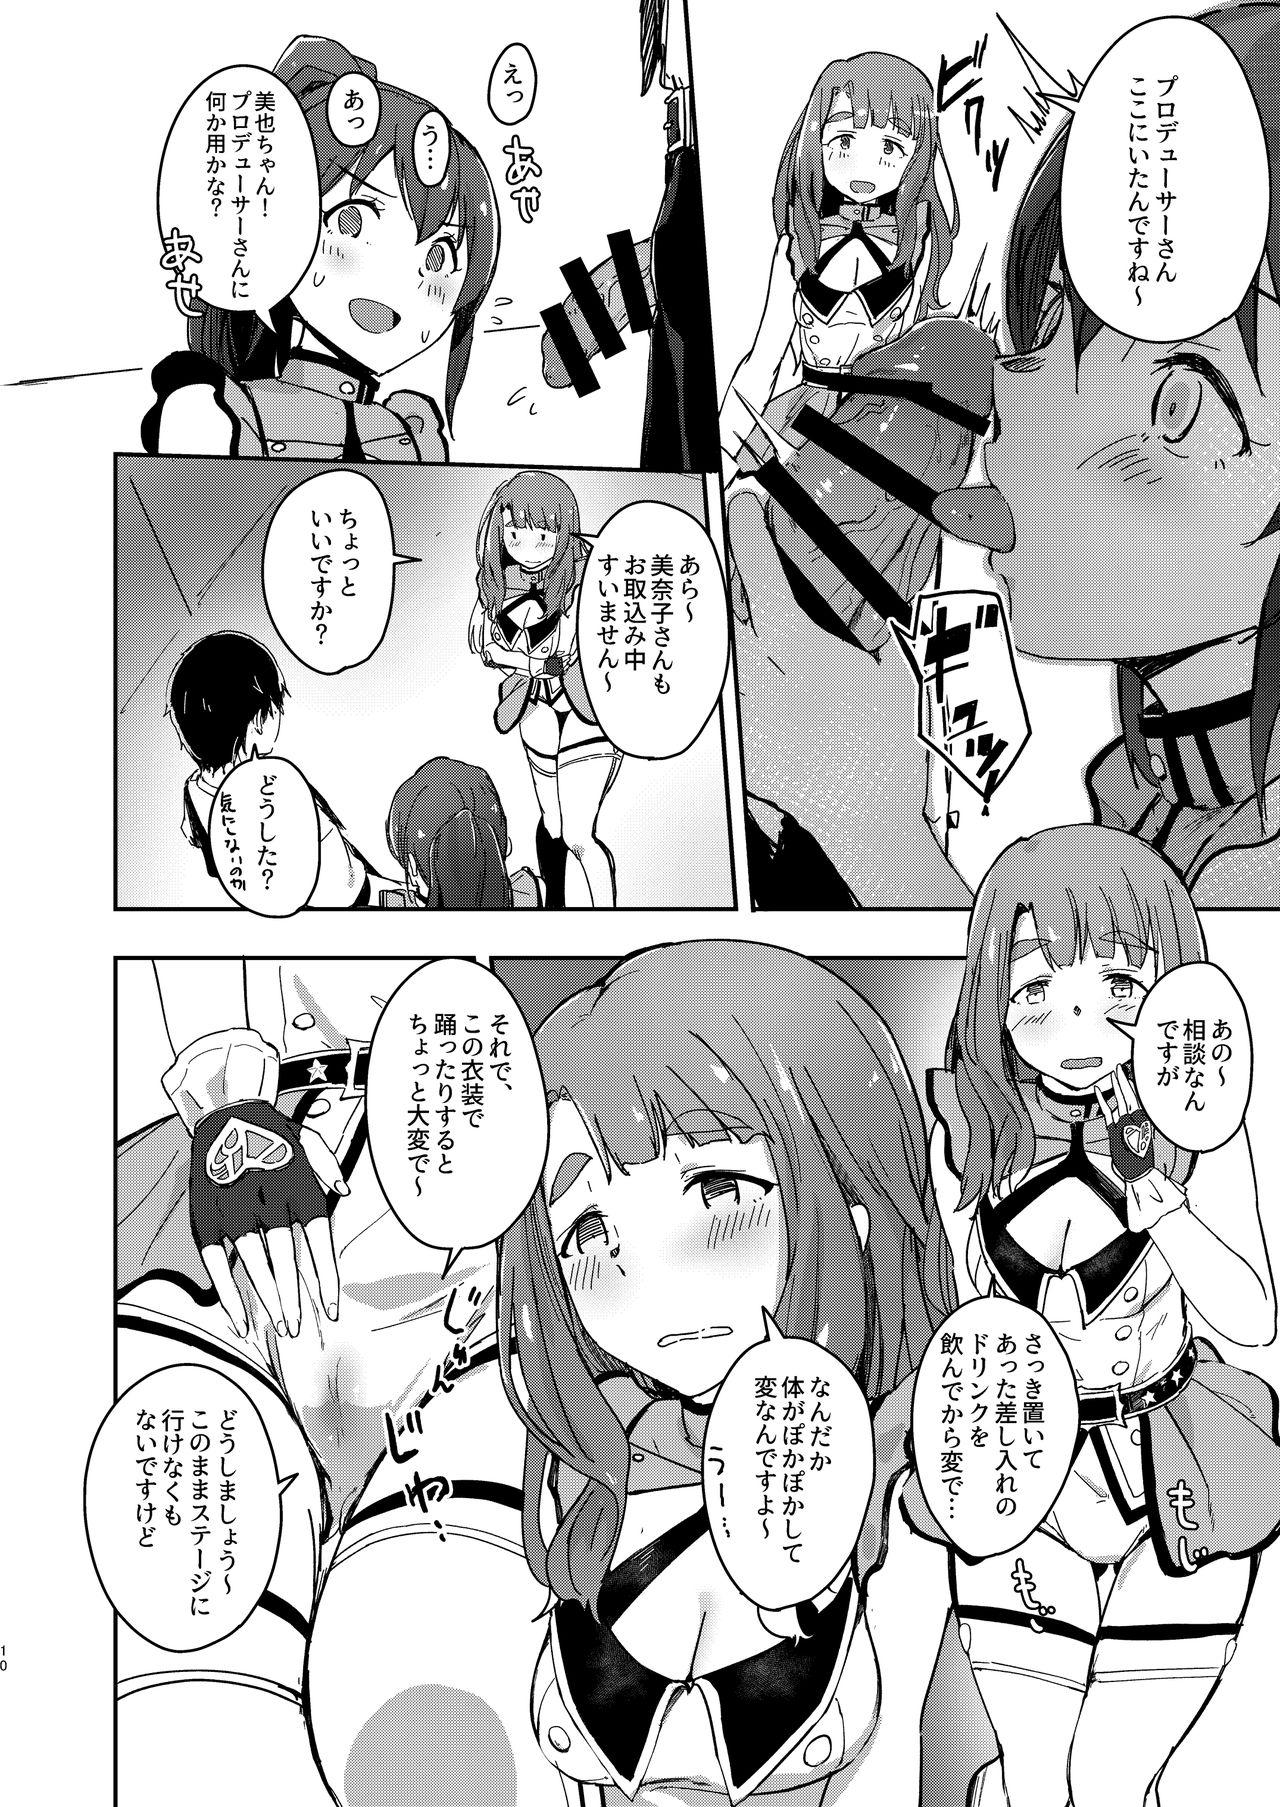 Belly TOP! CLOVER BOOK + omake - The idolmaster Rabo - Page 9